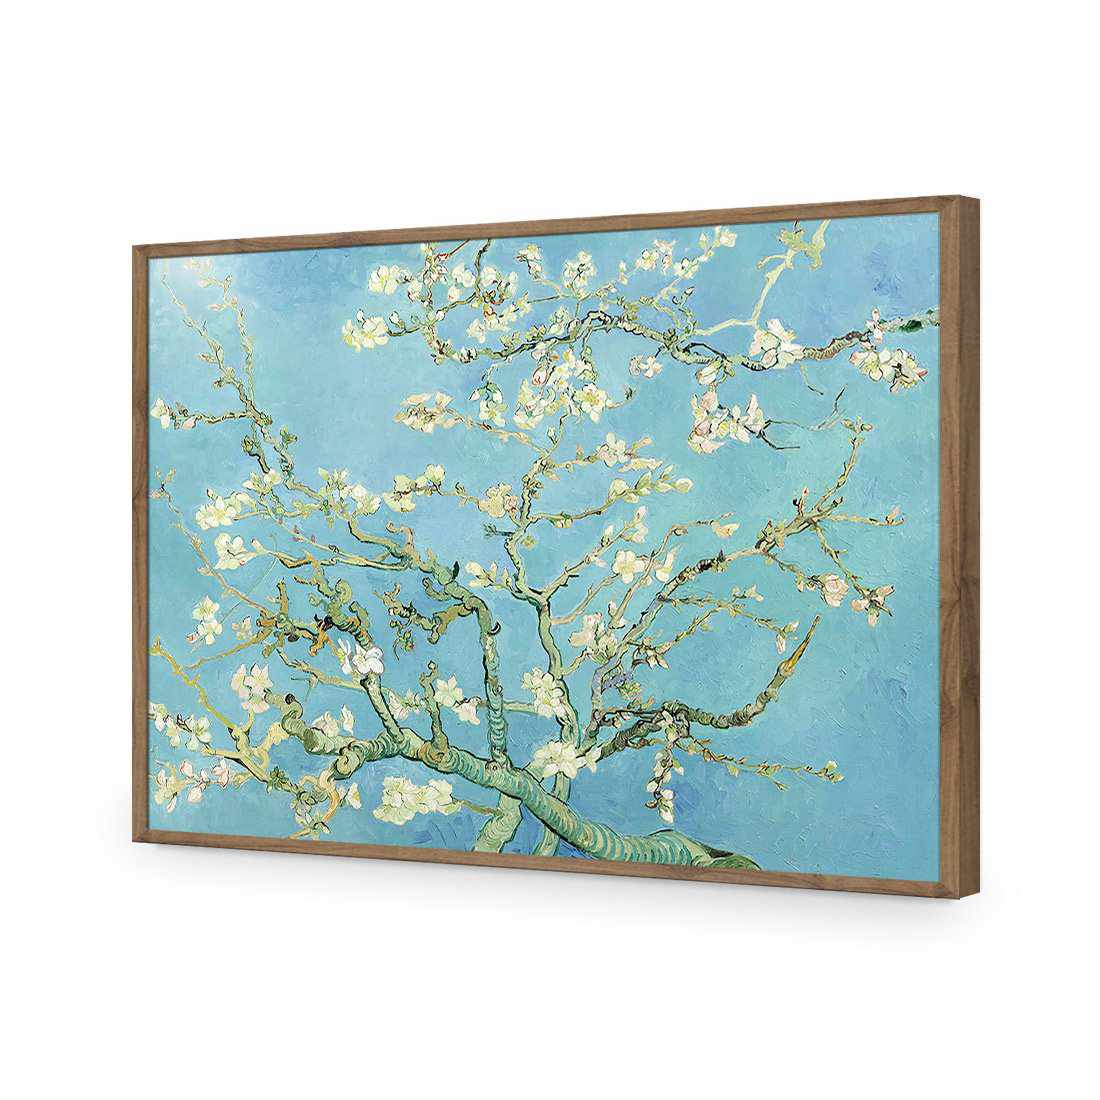 Blossoming Almond Tree - Van Gogh-Acrylic-Wall Art Design-Without Border-Acrylic - Natural Frame-45x30cm-Wall Art Designs